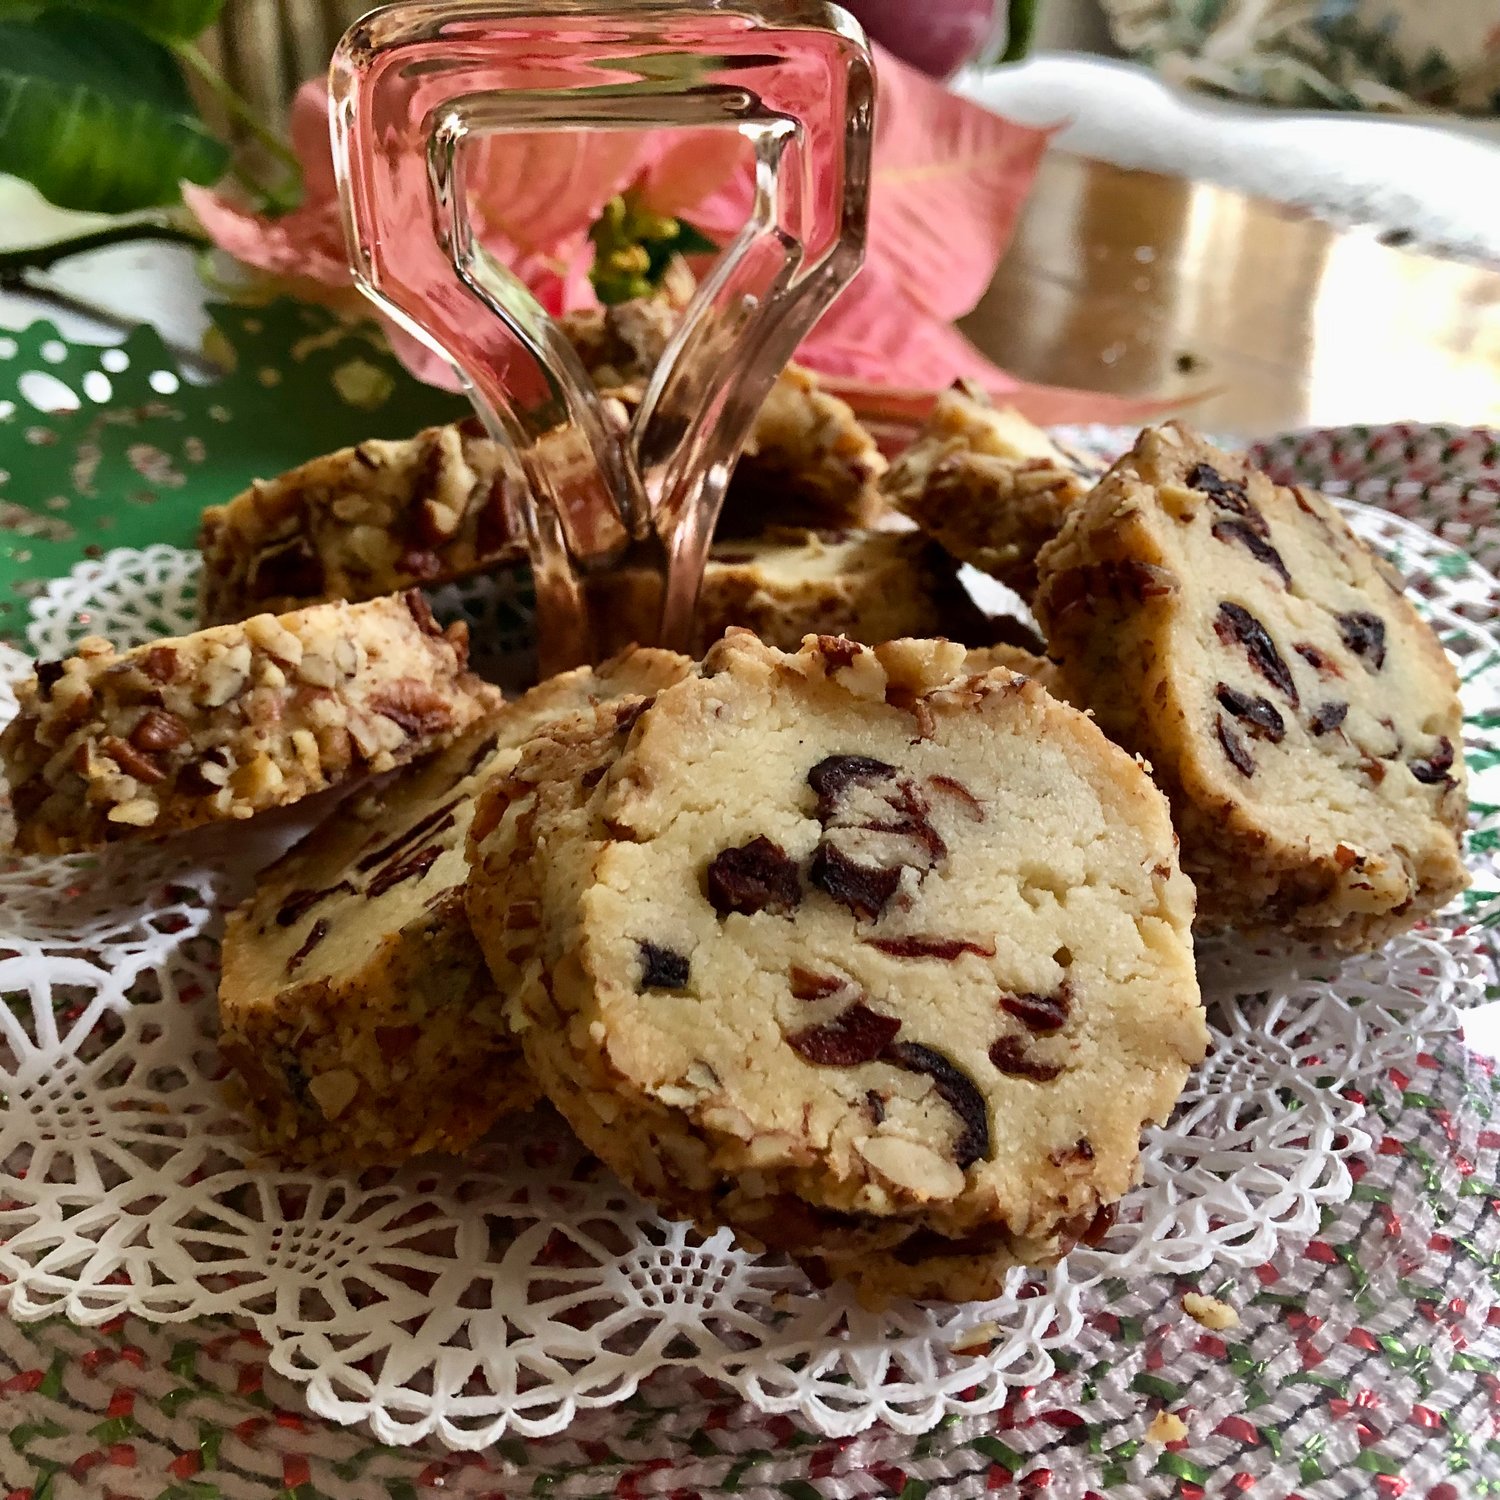 These Cranberry Pecan Cookies are “shortbread-like in spirit, yet with a middle made soft by cream cheese.”